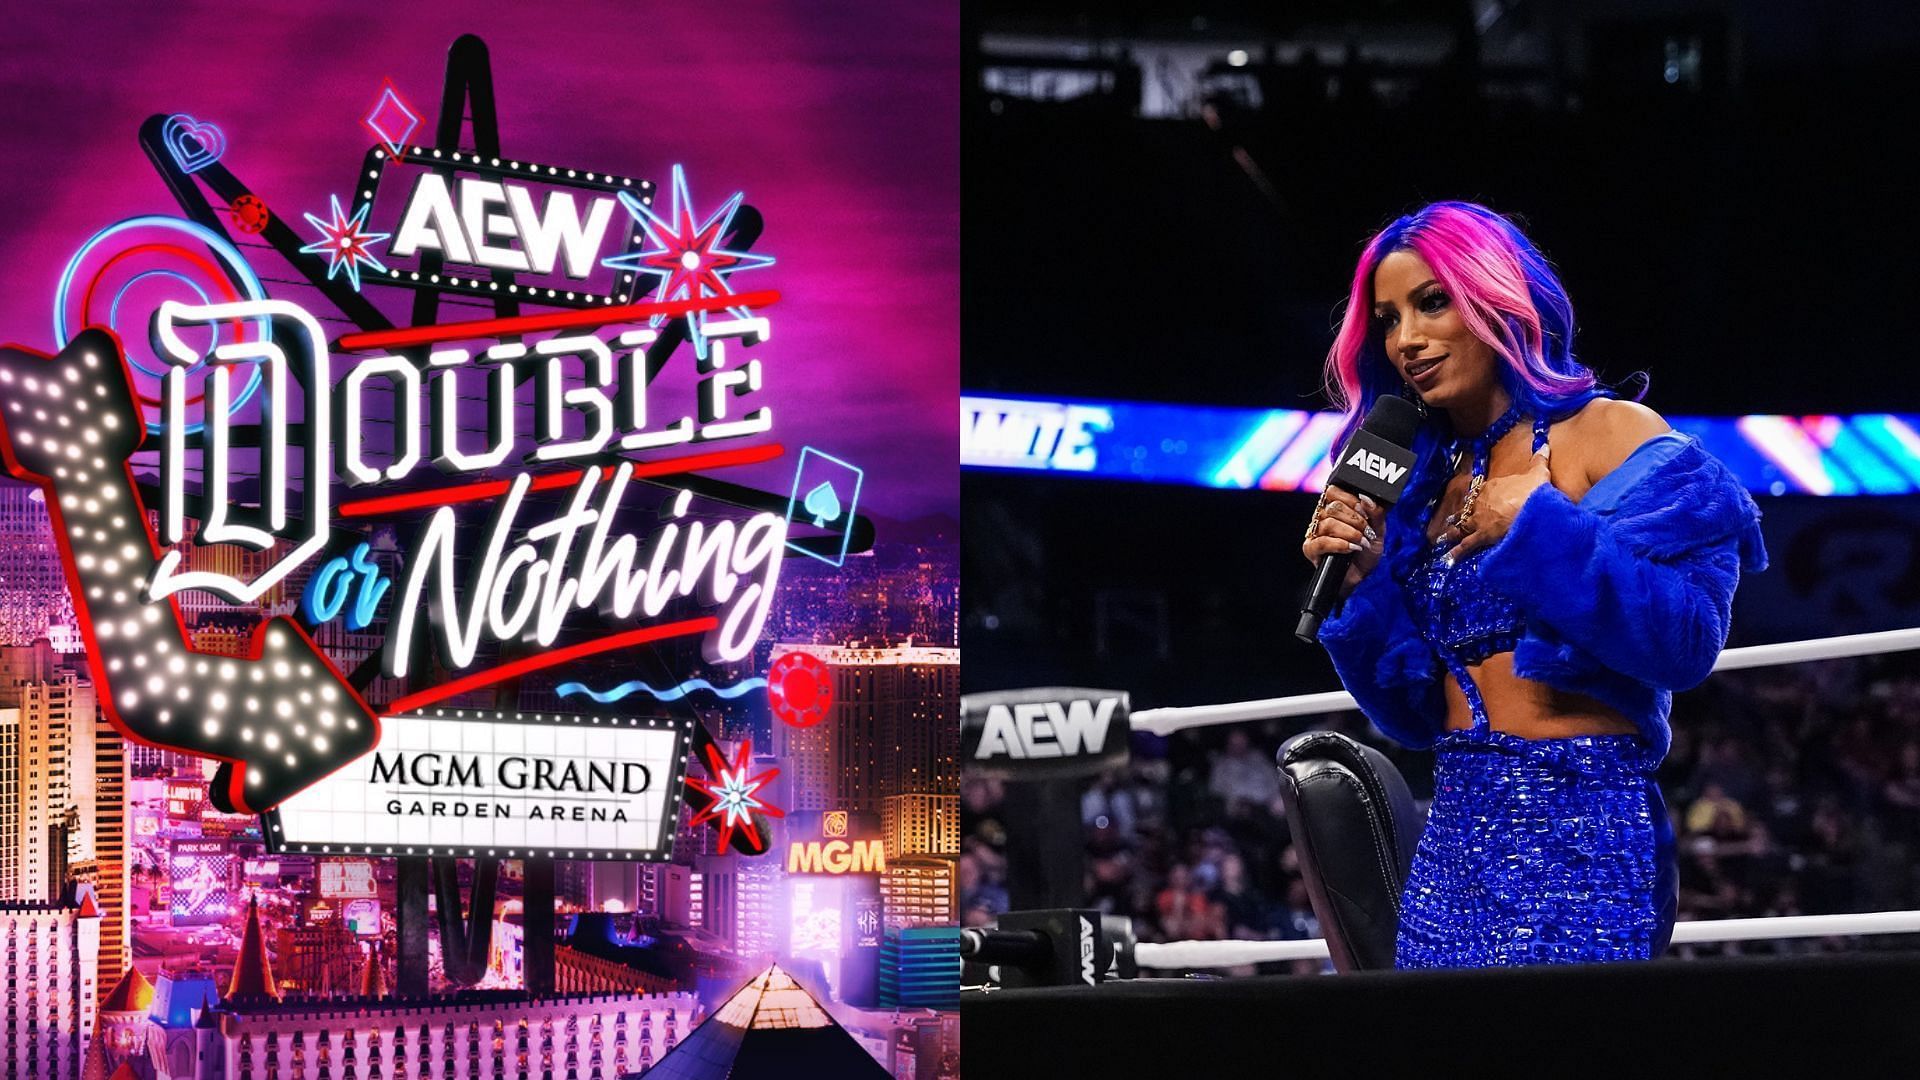 Mercedes Mon&eacute; is set to make her AEW in-ring debut this weekend at Double or Nothing [Photos courtesy of AEW